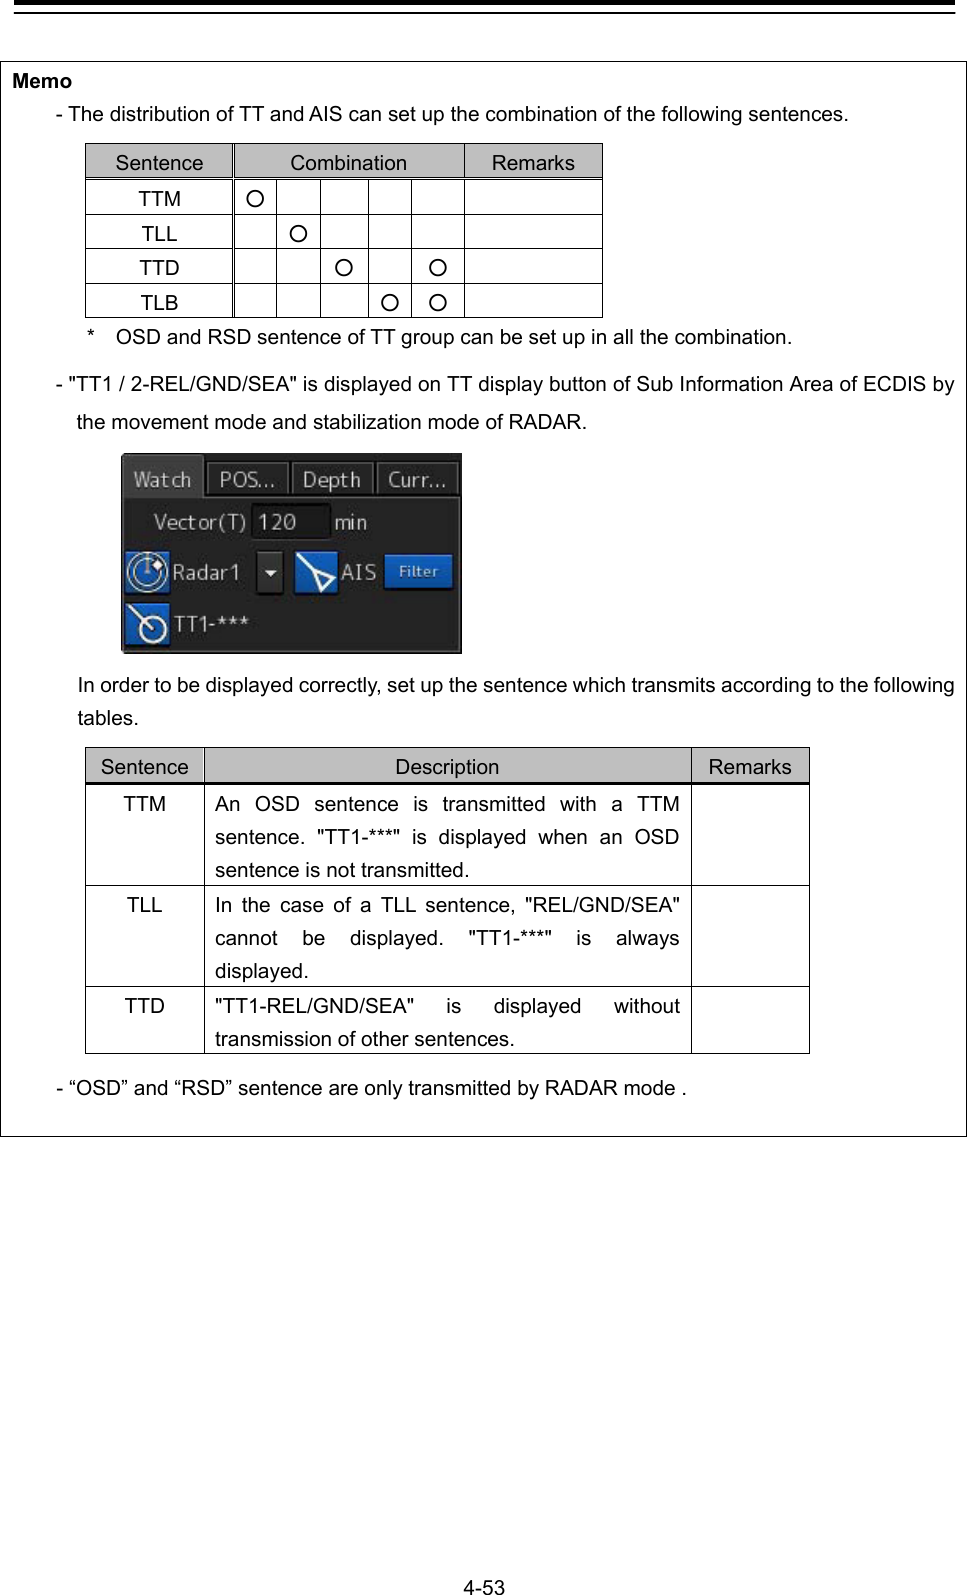   4-53  Memo - The distribution of TT and AIS can set up the combination of the following sentences.  Sentence  Combination  Remarks TTM  ○          TLL  ○        TTD   ○  ○ TLB    ○ ○     *  OSD and RSD sentence of TT group can be set up in all the combination.  - &quot;TT1 / 2-REL/GND/SEA&quot; is displayed on TT display button of Sub Information Area of ECDIS by the movement mode and stabilization mode of RADAR.       In order to be displayed correctly, set up the sentence which transmits according to the following tables.  Sentence  Description  Remarks TTM  An OSD sentence is transmitted with a TTM sentence. &quot;TT1-***&quot; is displayed when an OSD sentence is not transmitted.  TLL  In the case of a TLL sentence, &quot;REL/GND/SEA&quot; cannot be displayed. &quot;TT1-***&quot; is always displayed.  TTD  &quot;TT1-REL/GND/SEA&quot; is displayed without transmission of other sentences.    - “OSD” and “RSD” sentence are only transmitted by RADAR mode .     